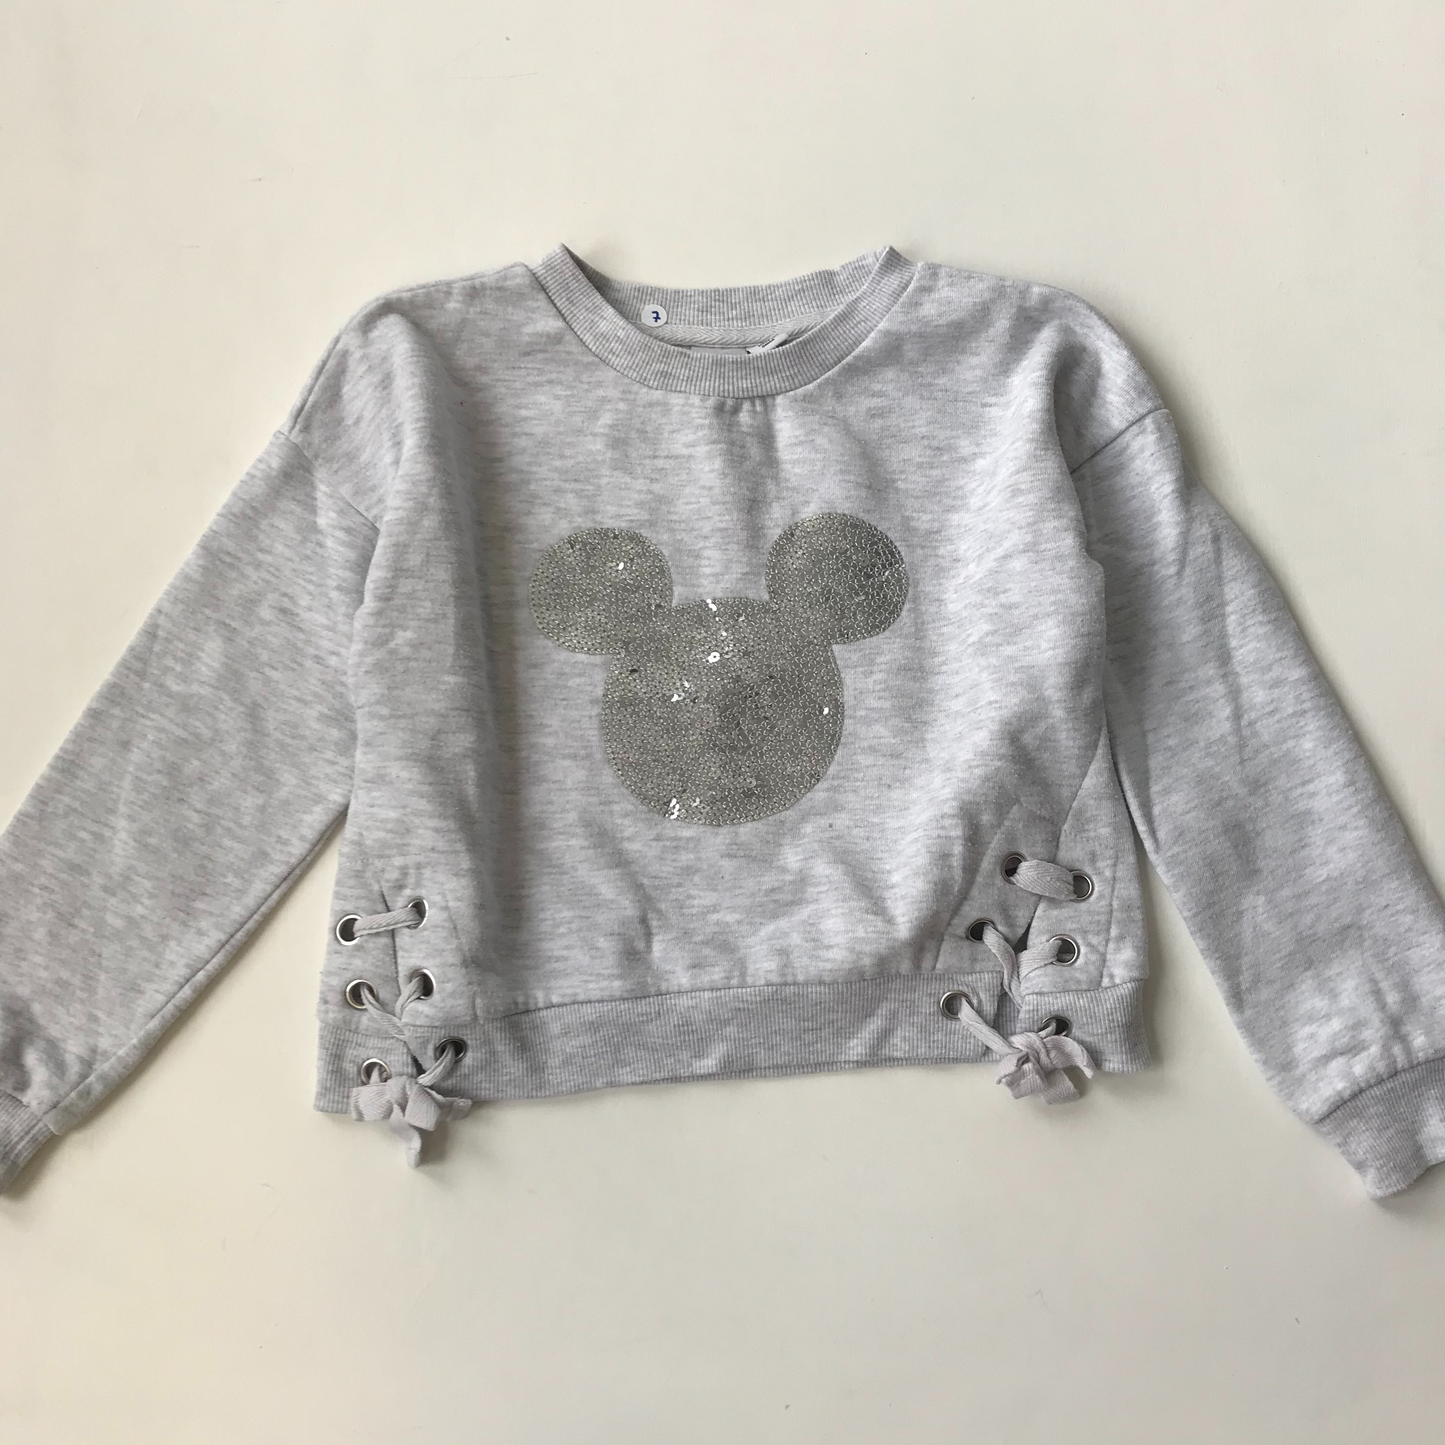 Sweatshirt - Sparkly Mickey Mouse - Age 7